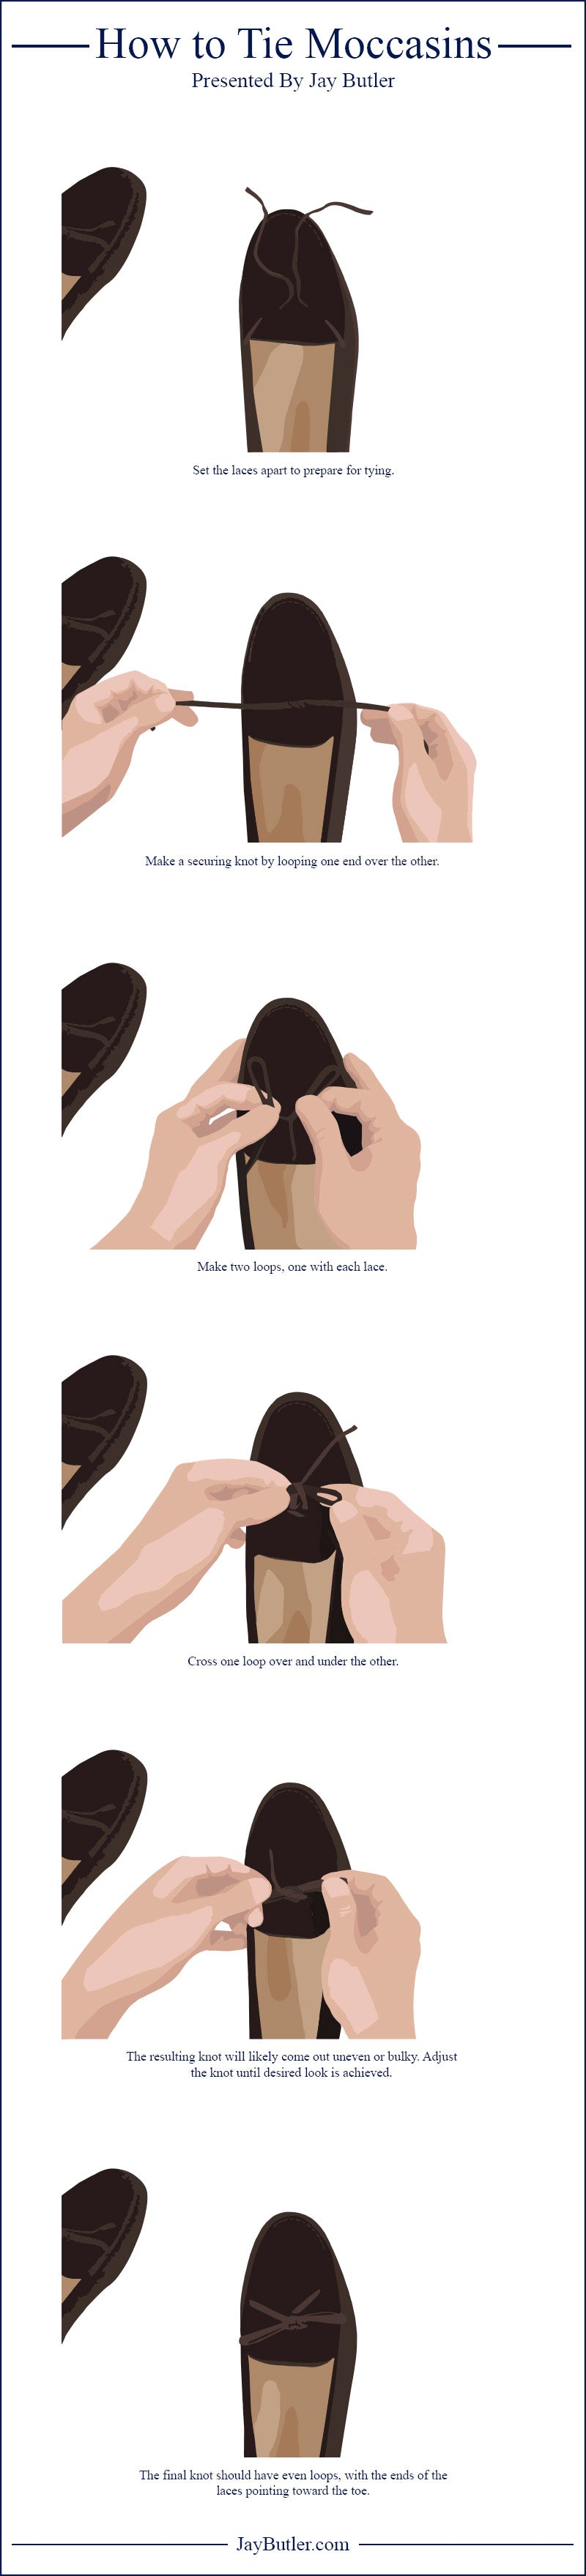 how to tie moccasins infographic